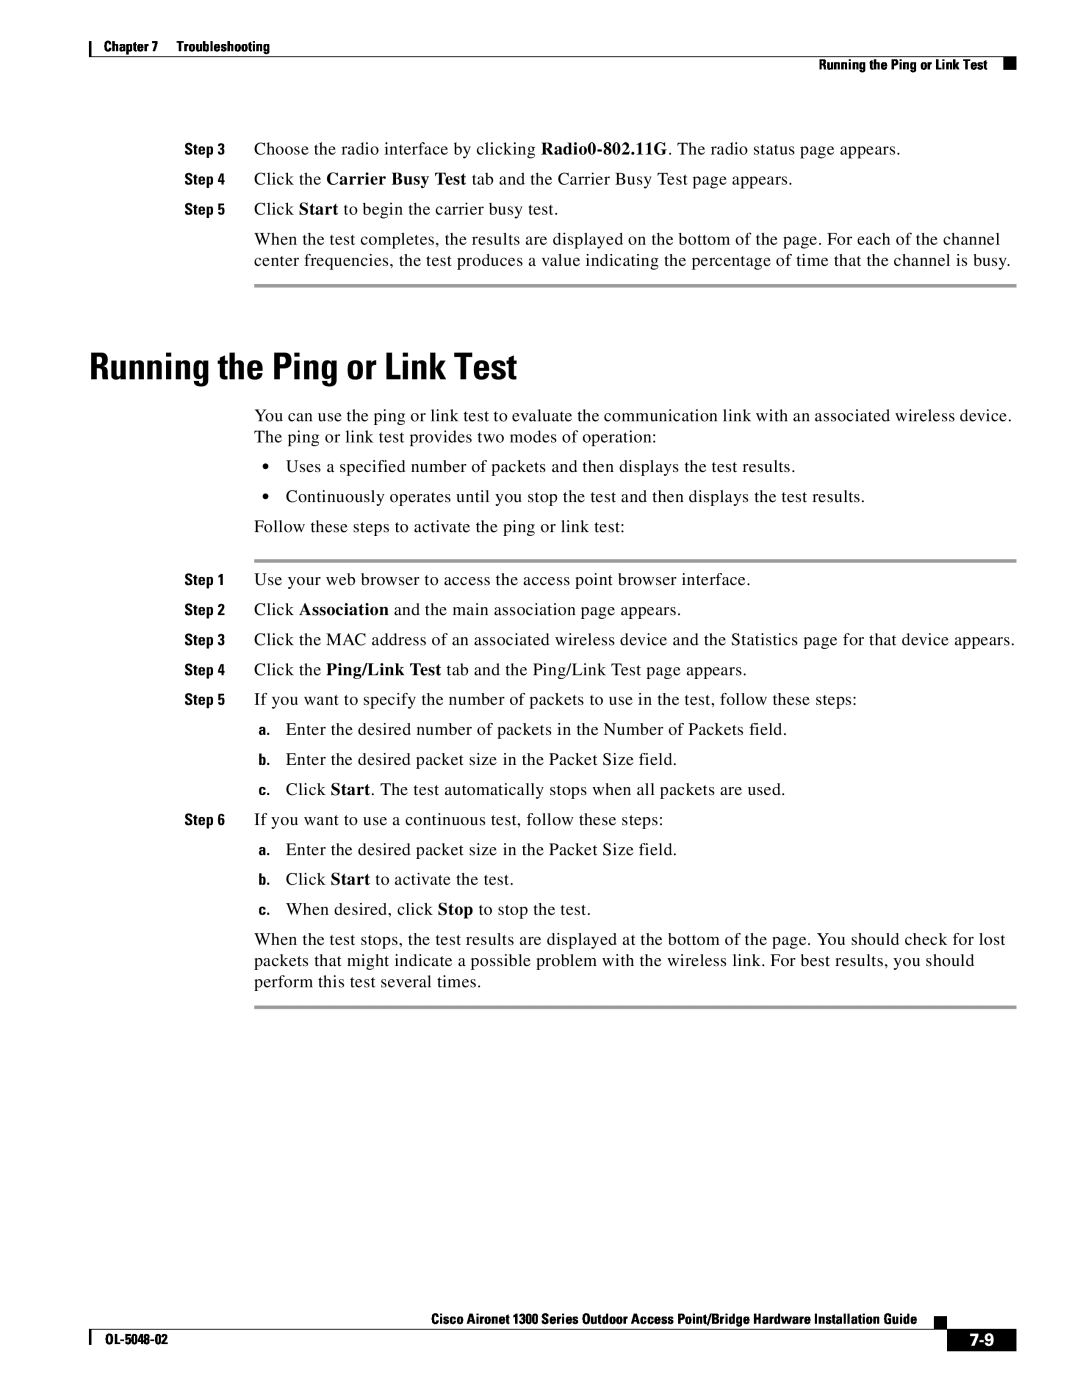 Cisco Systems 1300 Series manual Running the Ping or Link Test 